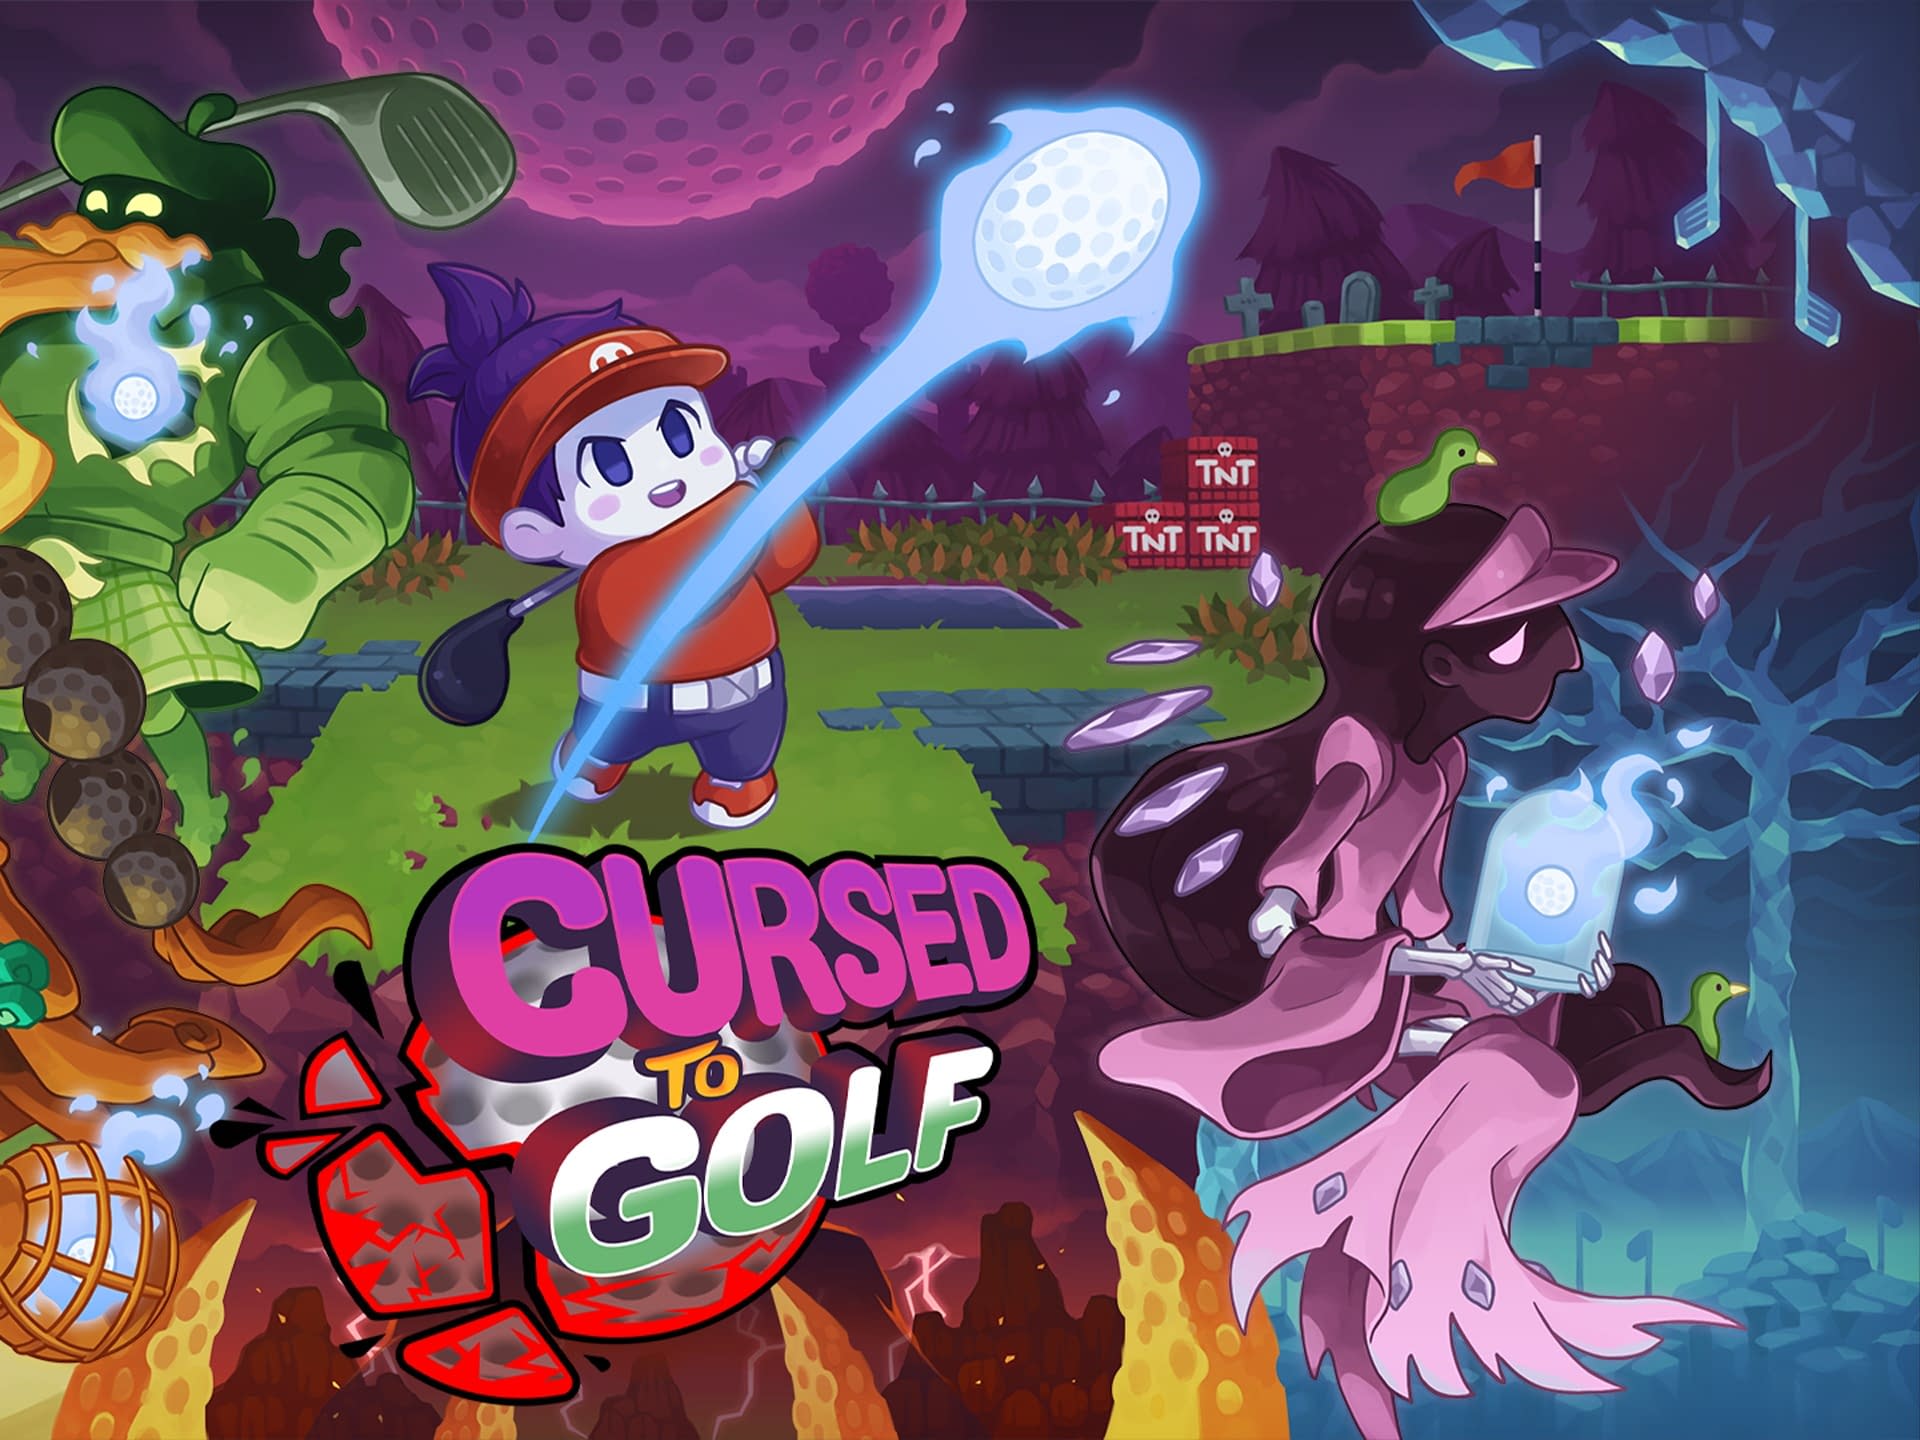 Remember to Get Cursed to Golf Game on Epic Games Free